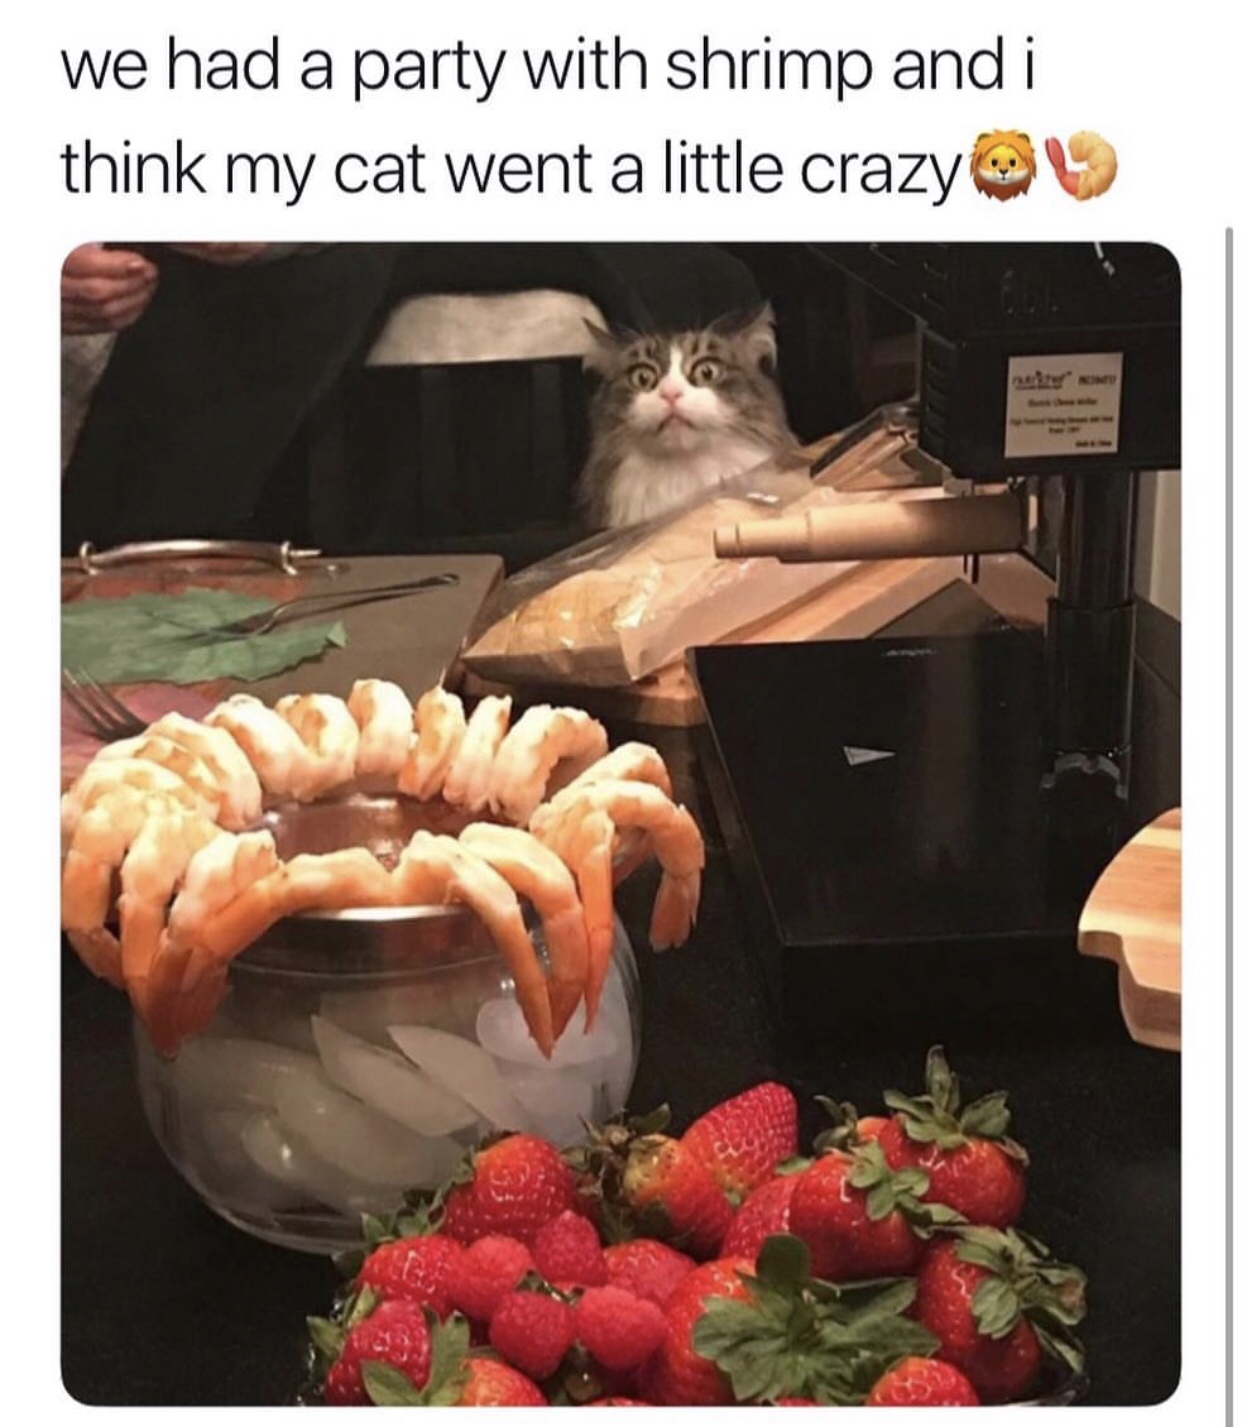 Funny meme - Cat - we had a party with shrimp and i think my cat went a little crazy